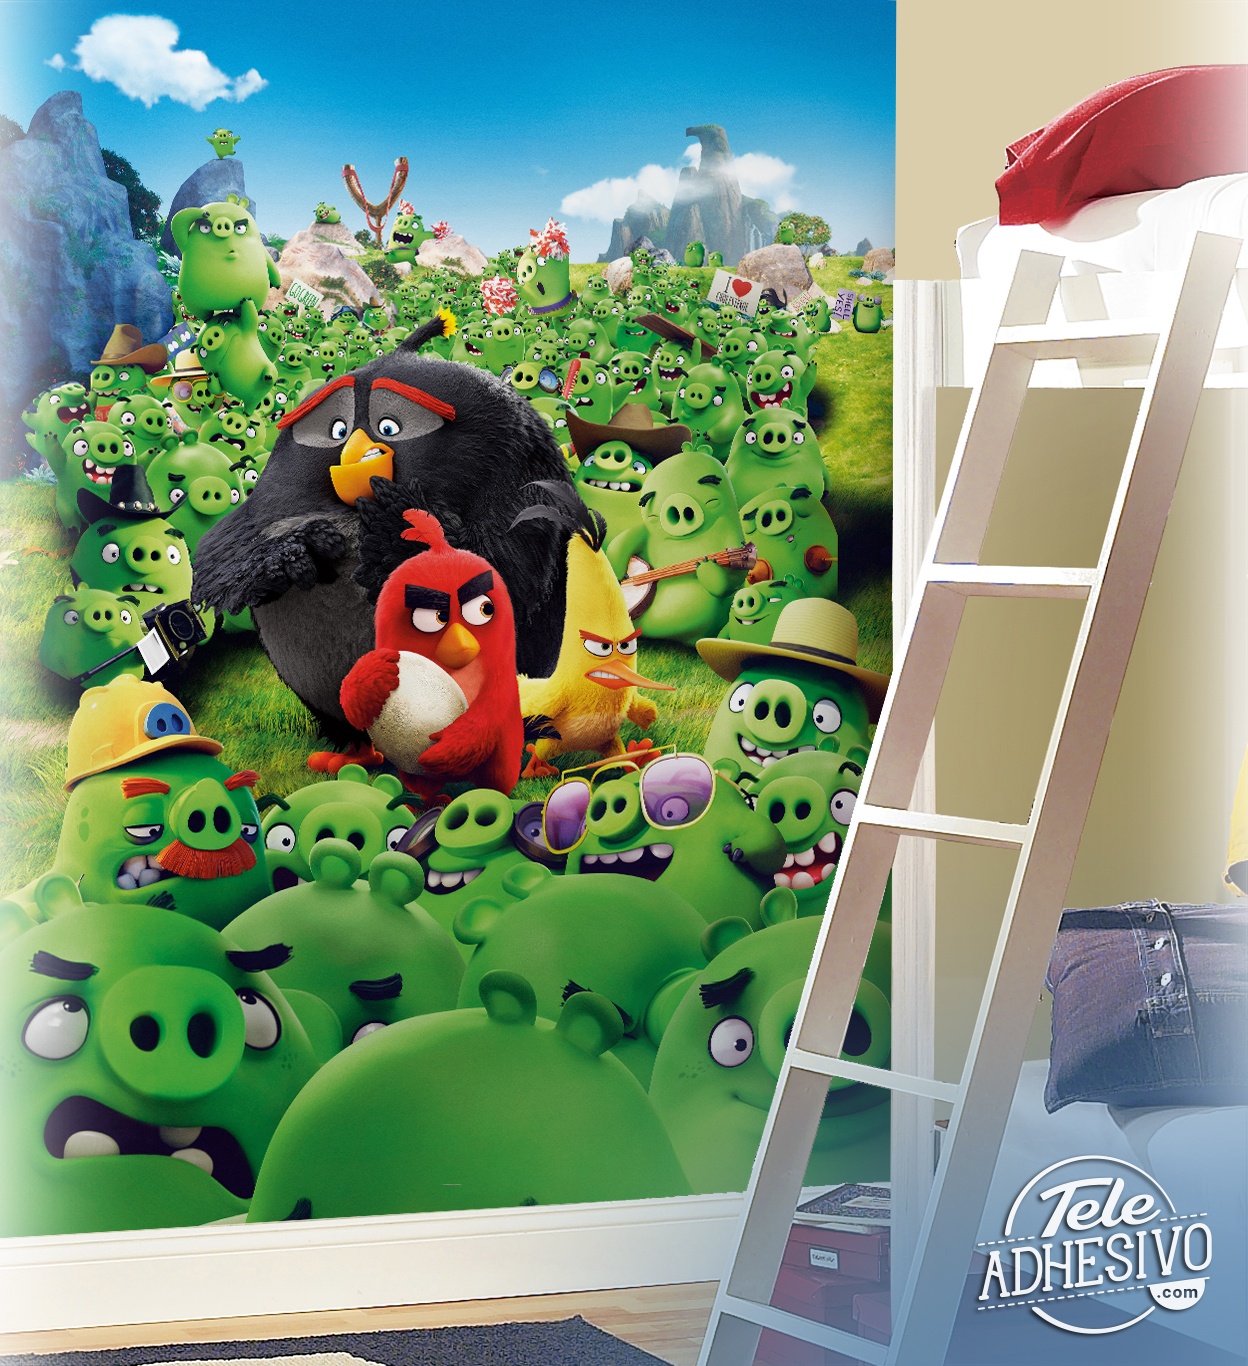 Fotomurales: Angry Birds